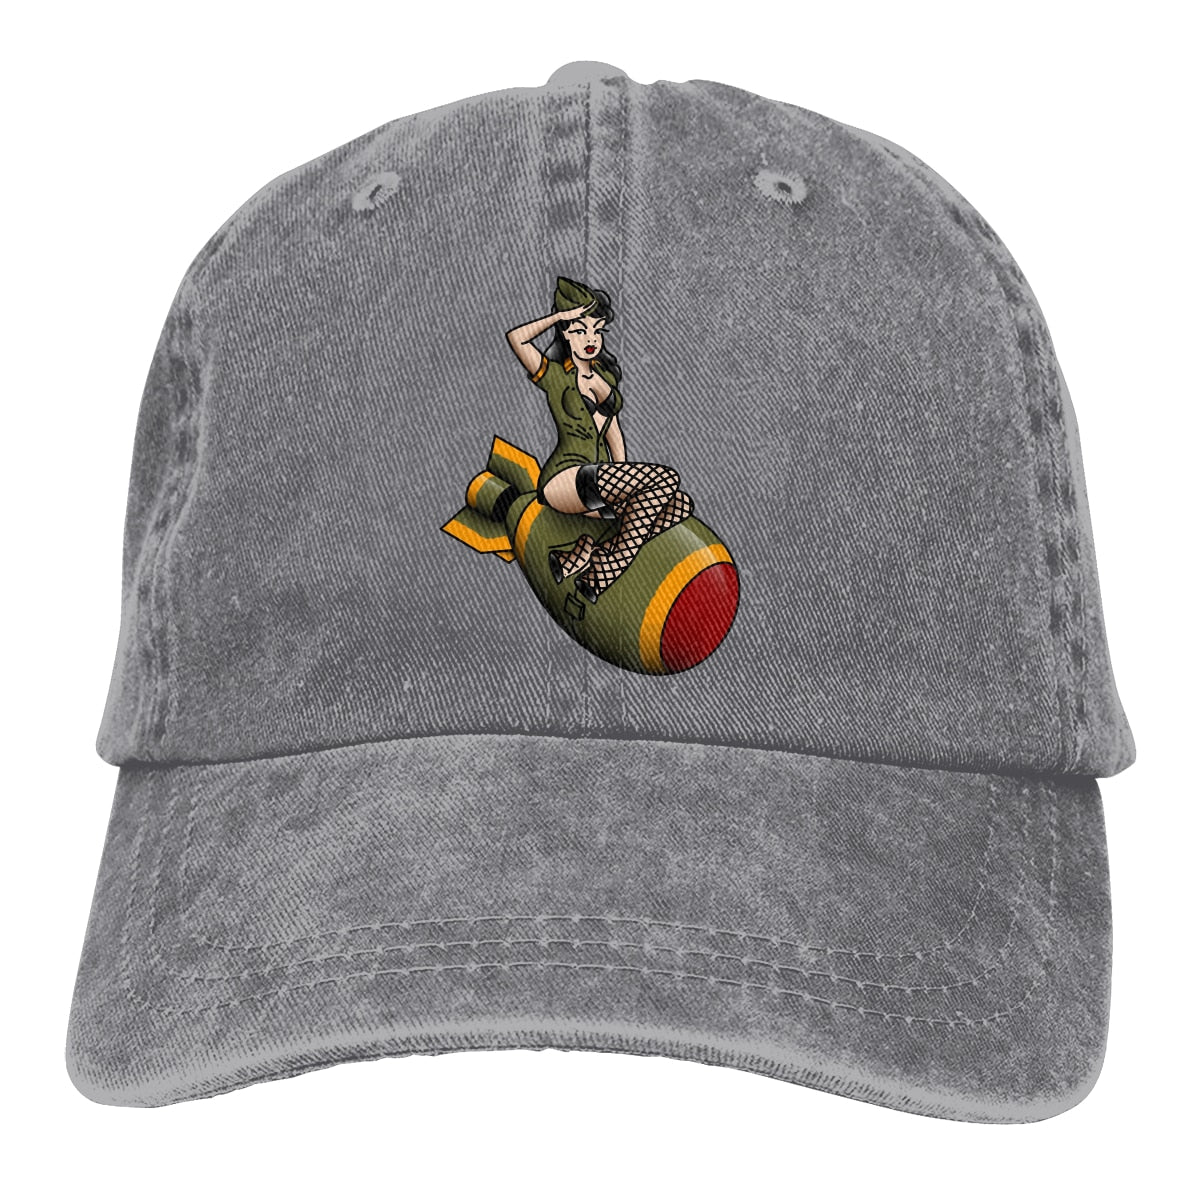 Adjustable Solid Color Baseball Cap Salty-Dog Patriotic Atomic Bomb Belle Pin-up Girl Washed Cotton ww2 WWII World War 2  Hat